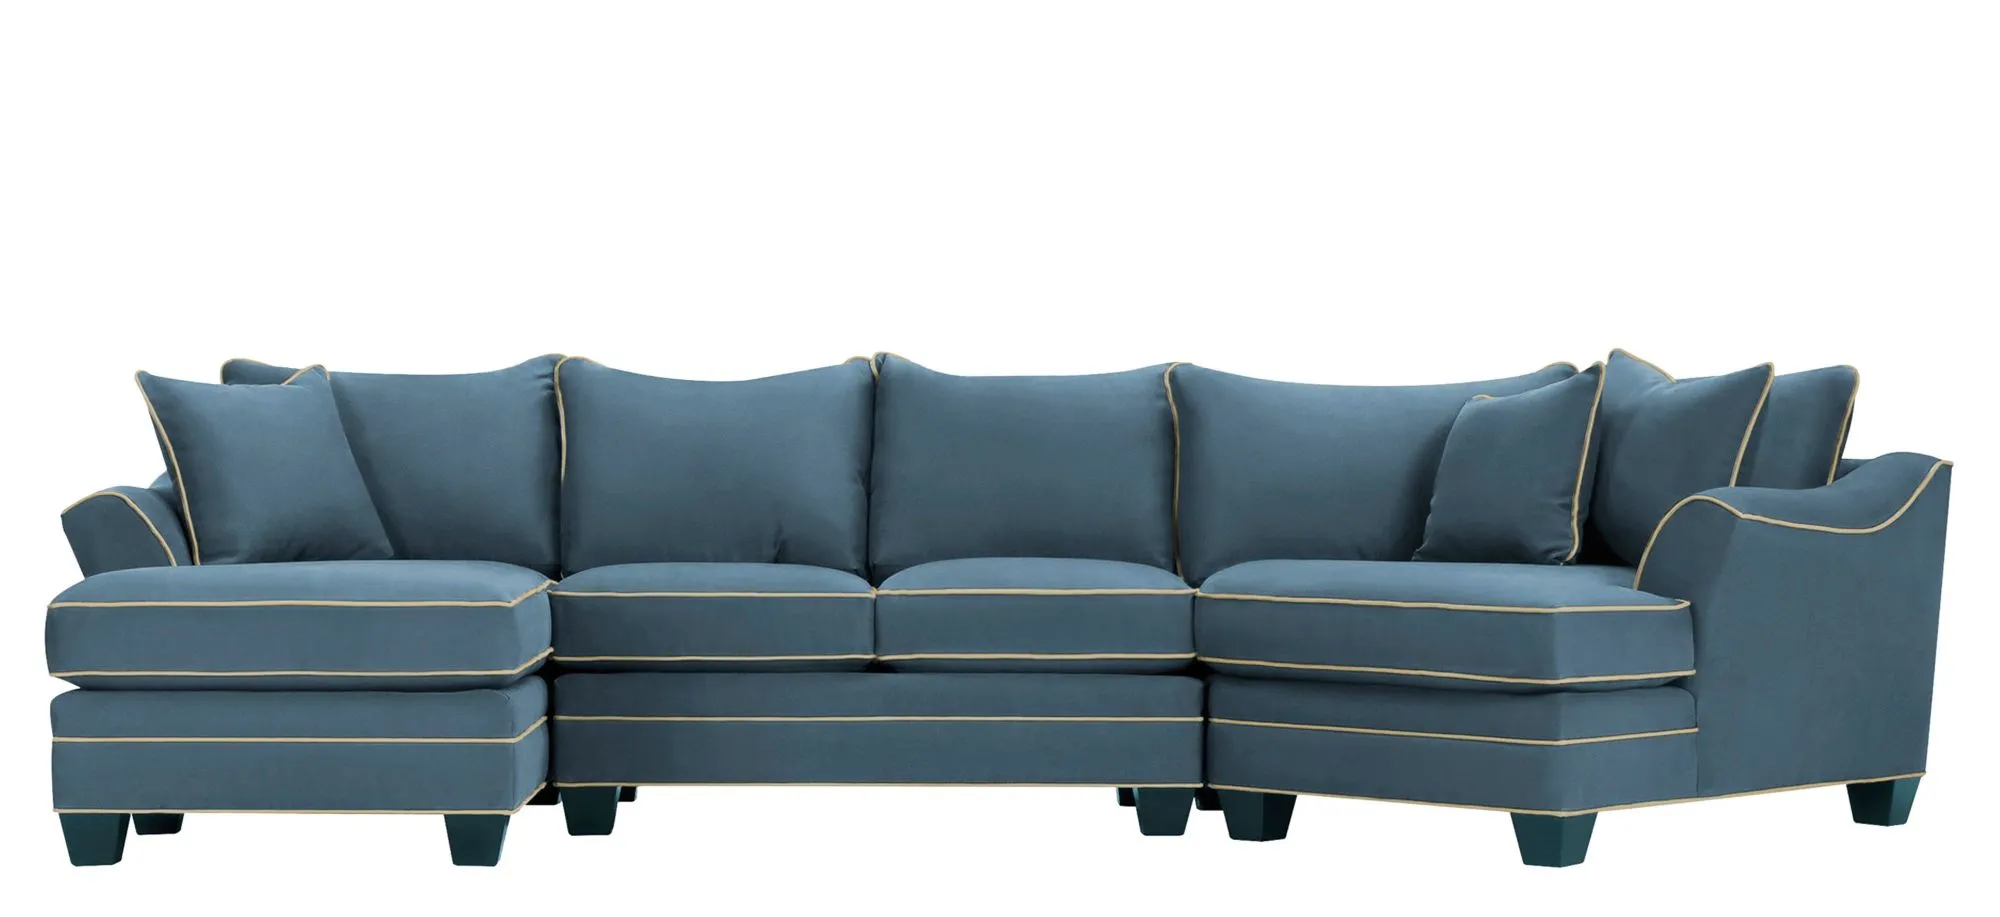 Foresthill 3-pc. Left Hand Facing Sectional Sofa in Suede So Soft Indigo/Mineral by H.M. Richards